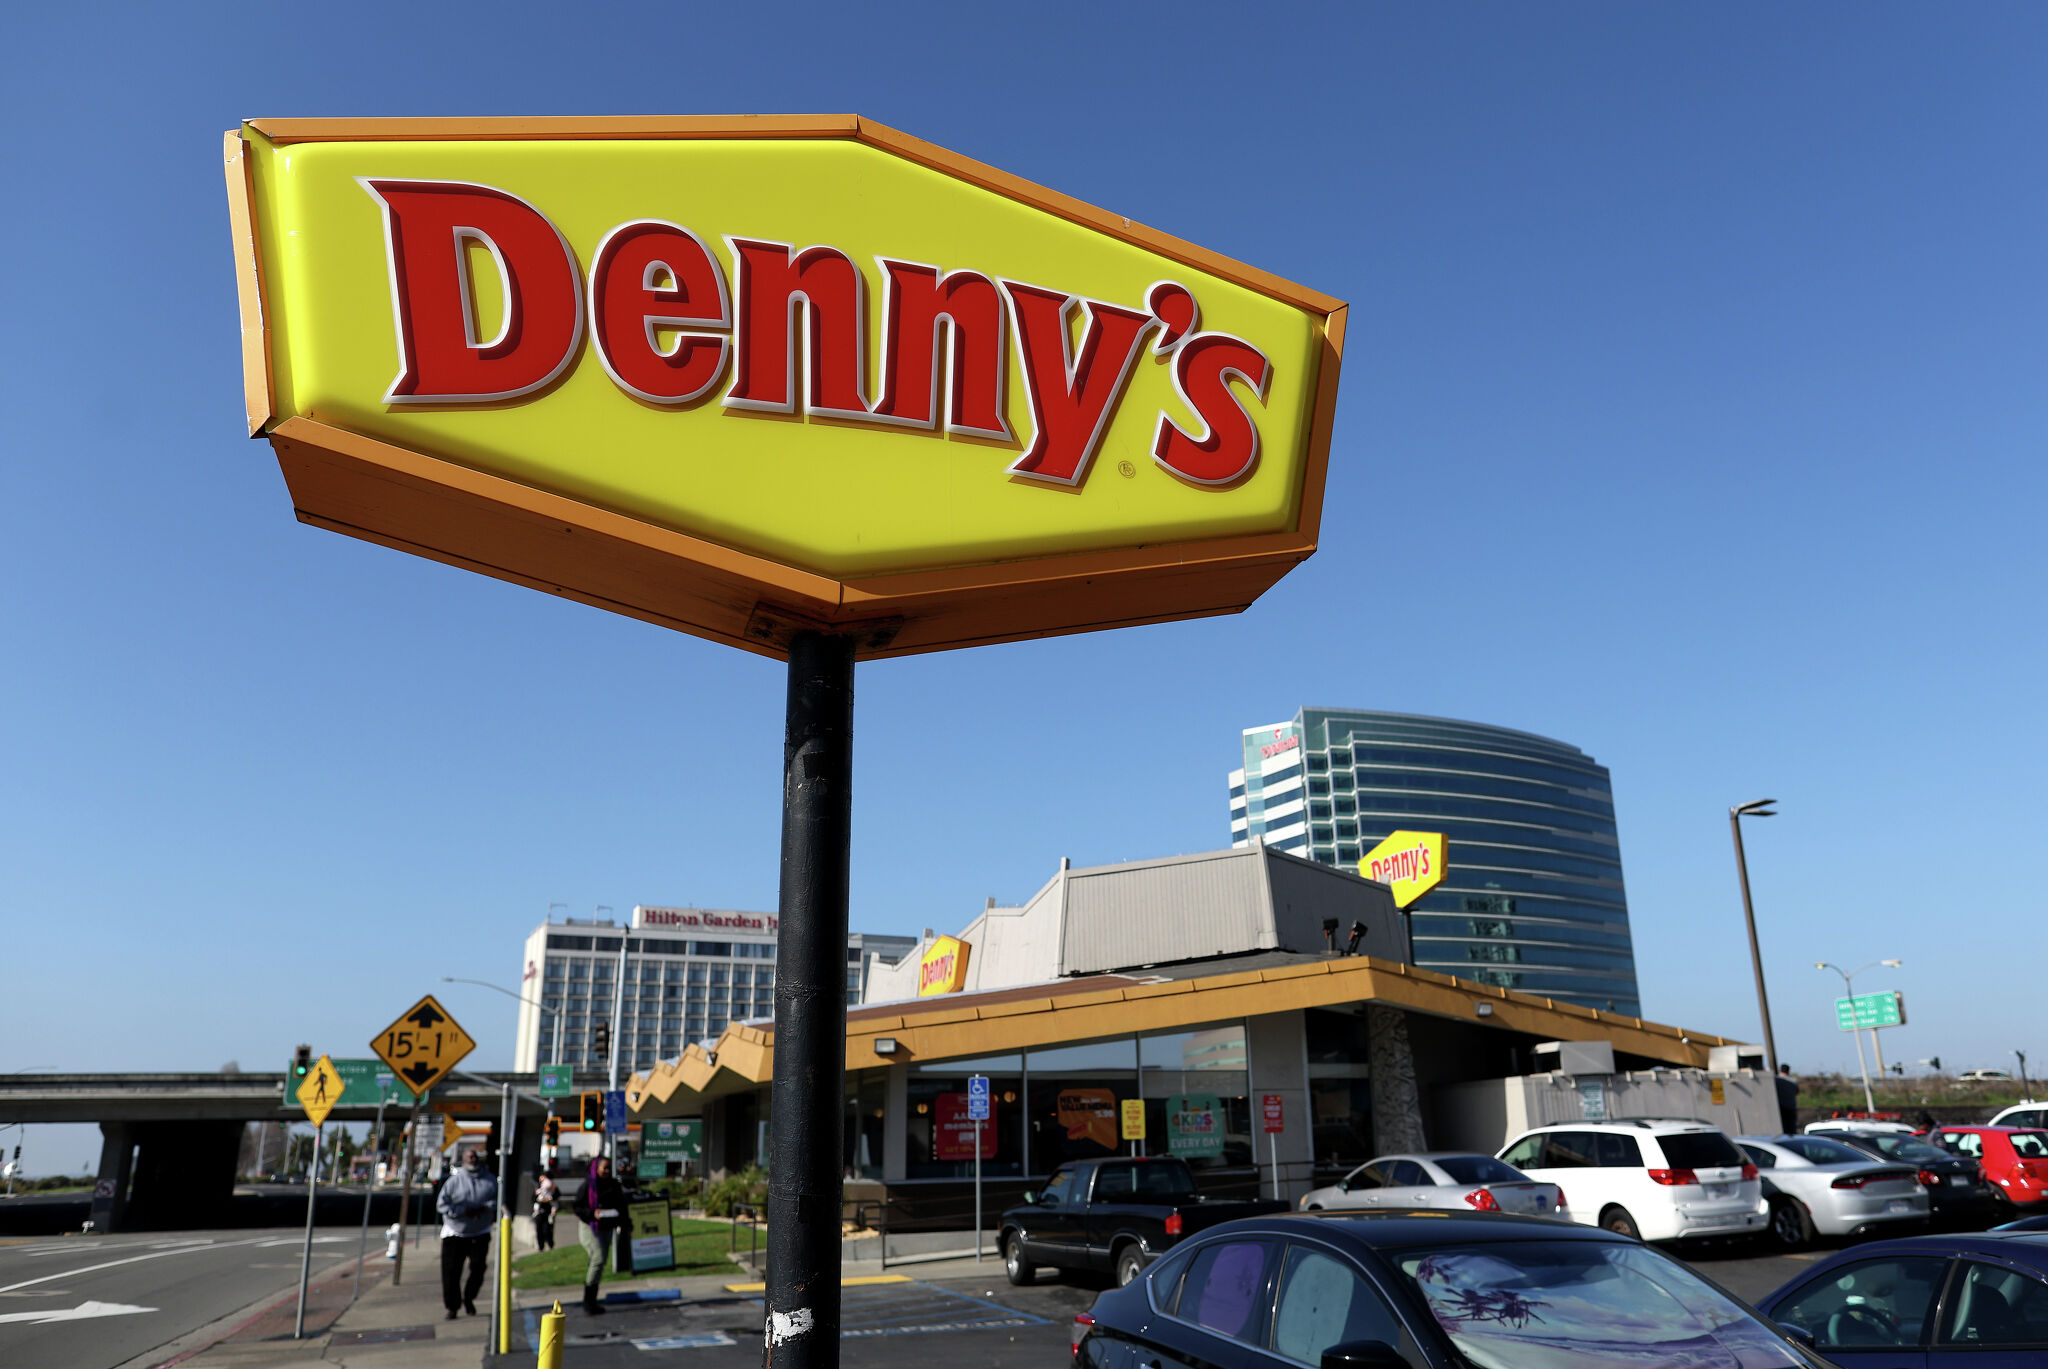 Denny's launches drive-thru grocery service during pandemic